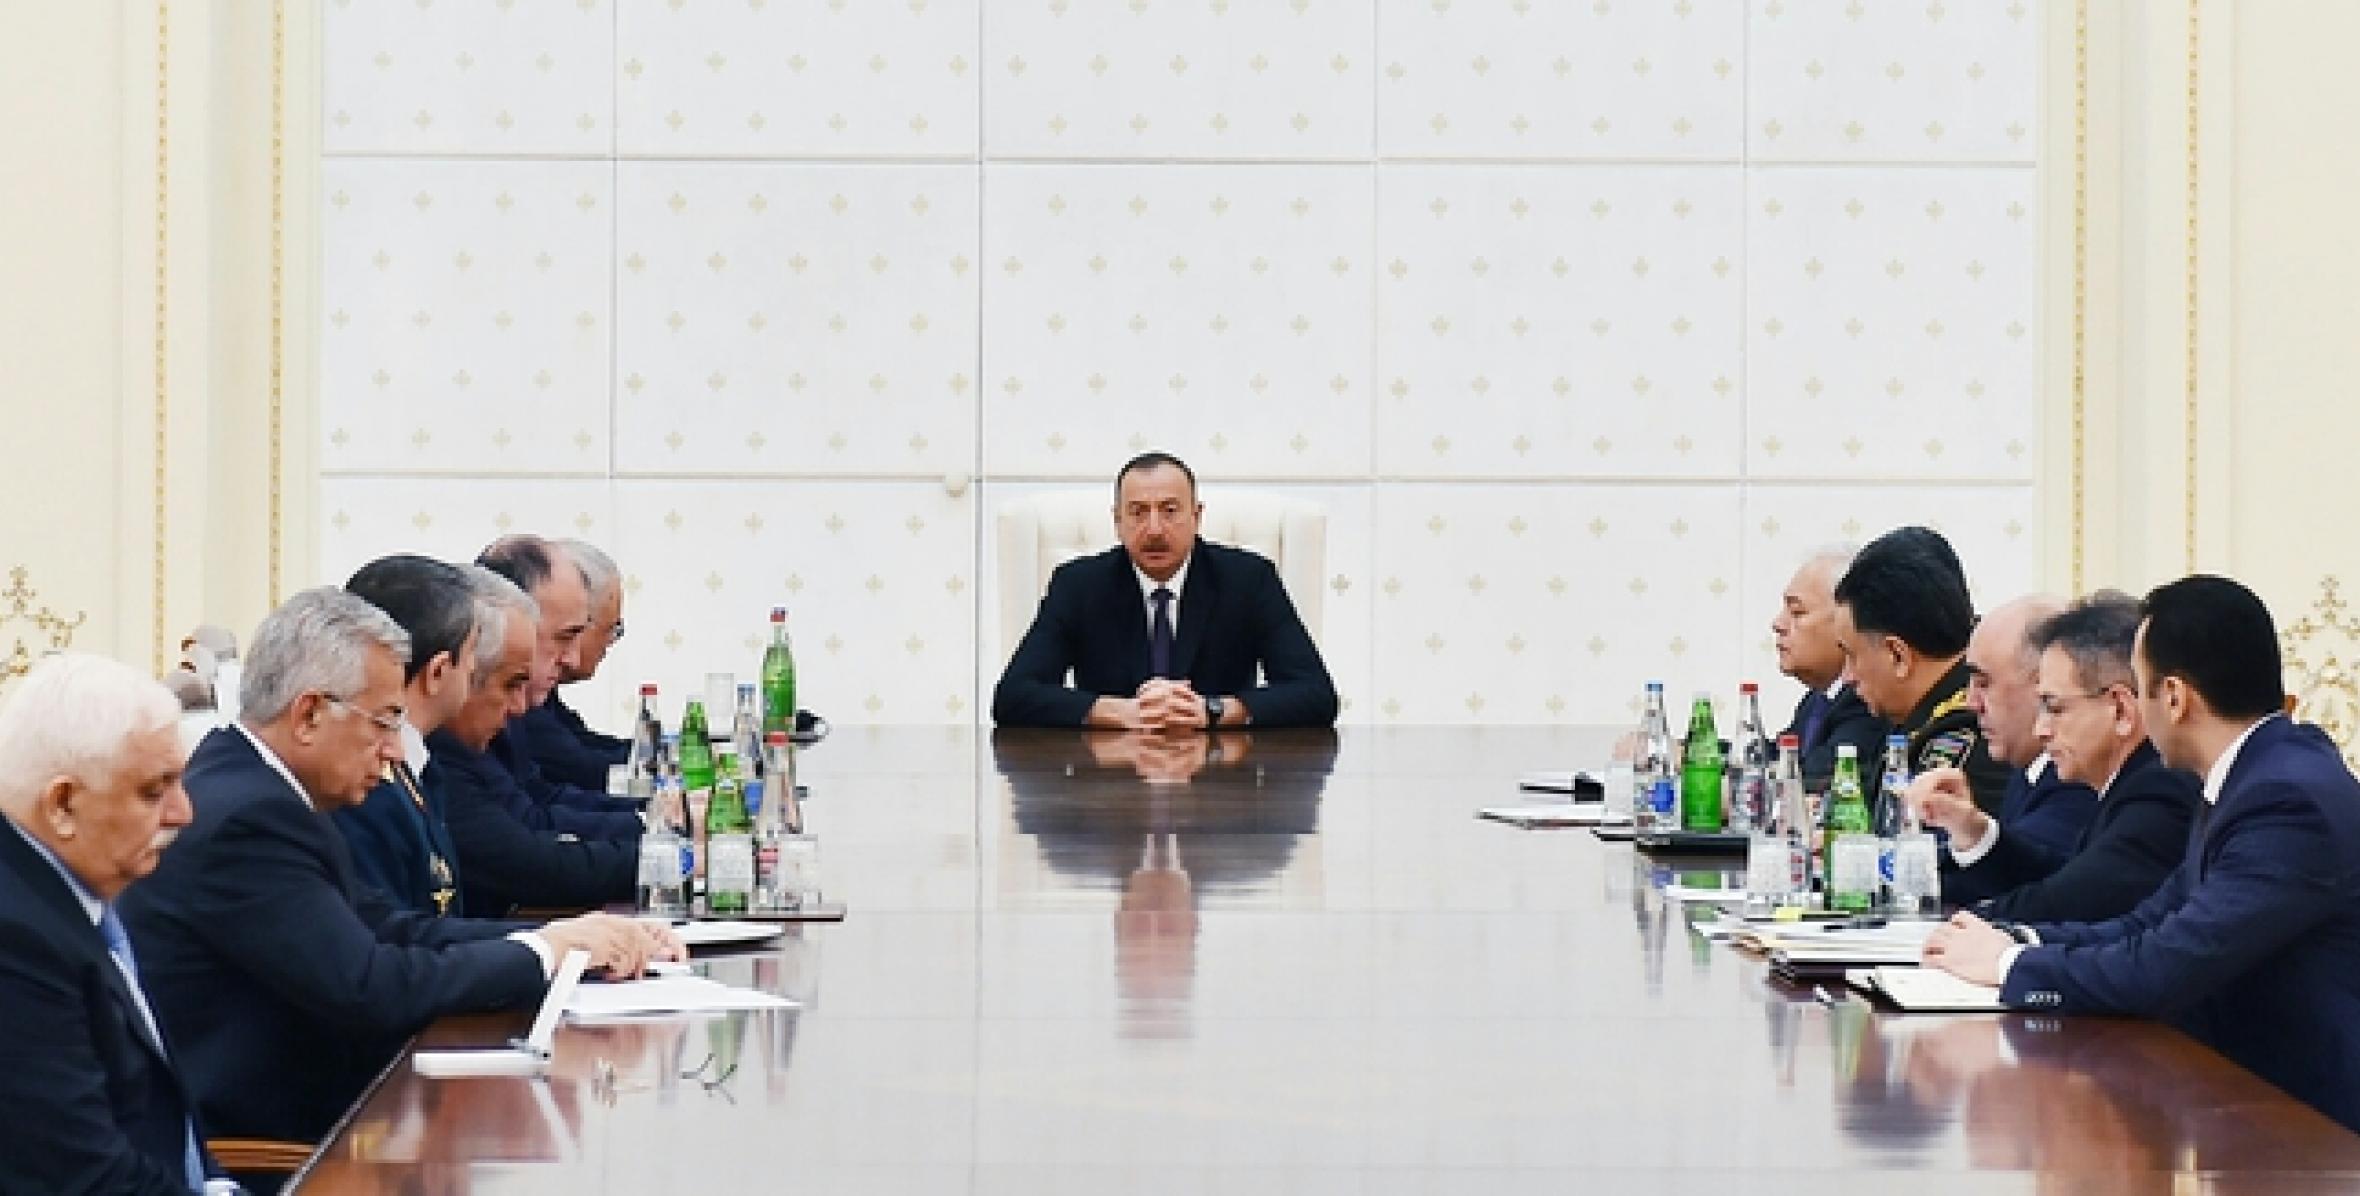 Speech by Ilham Aliyev at the meeting of the Security Council under the President of Azerbaijan